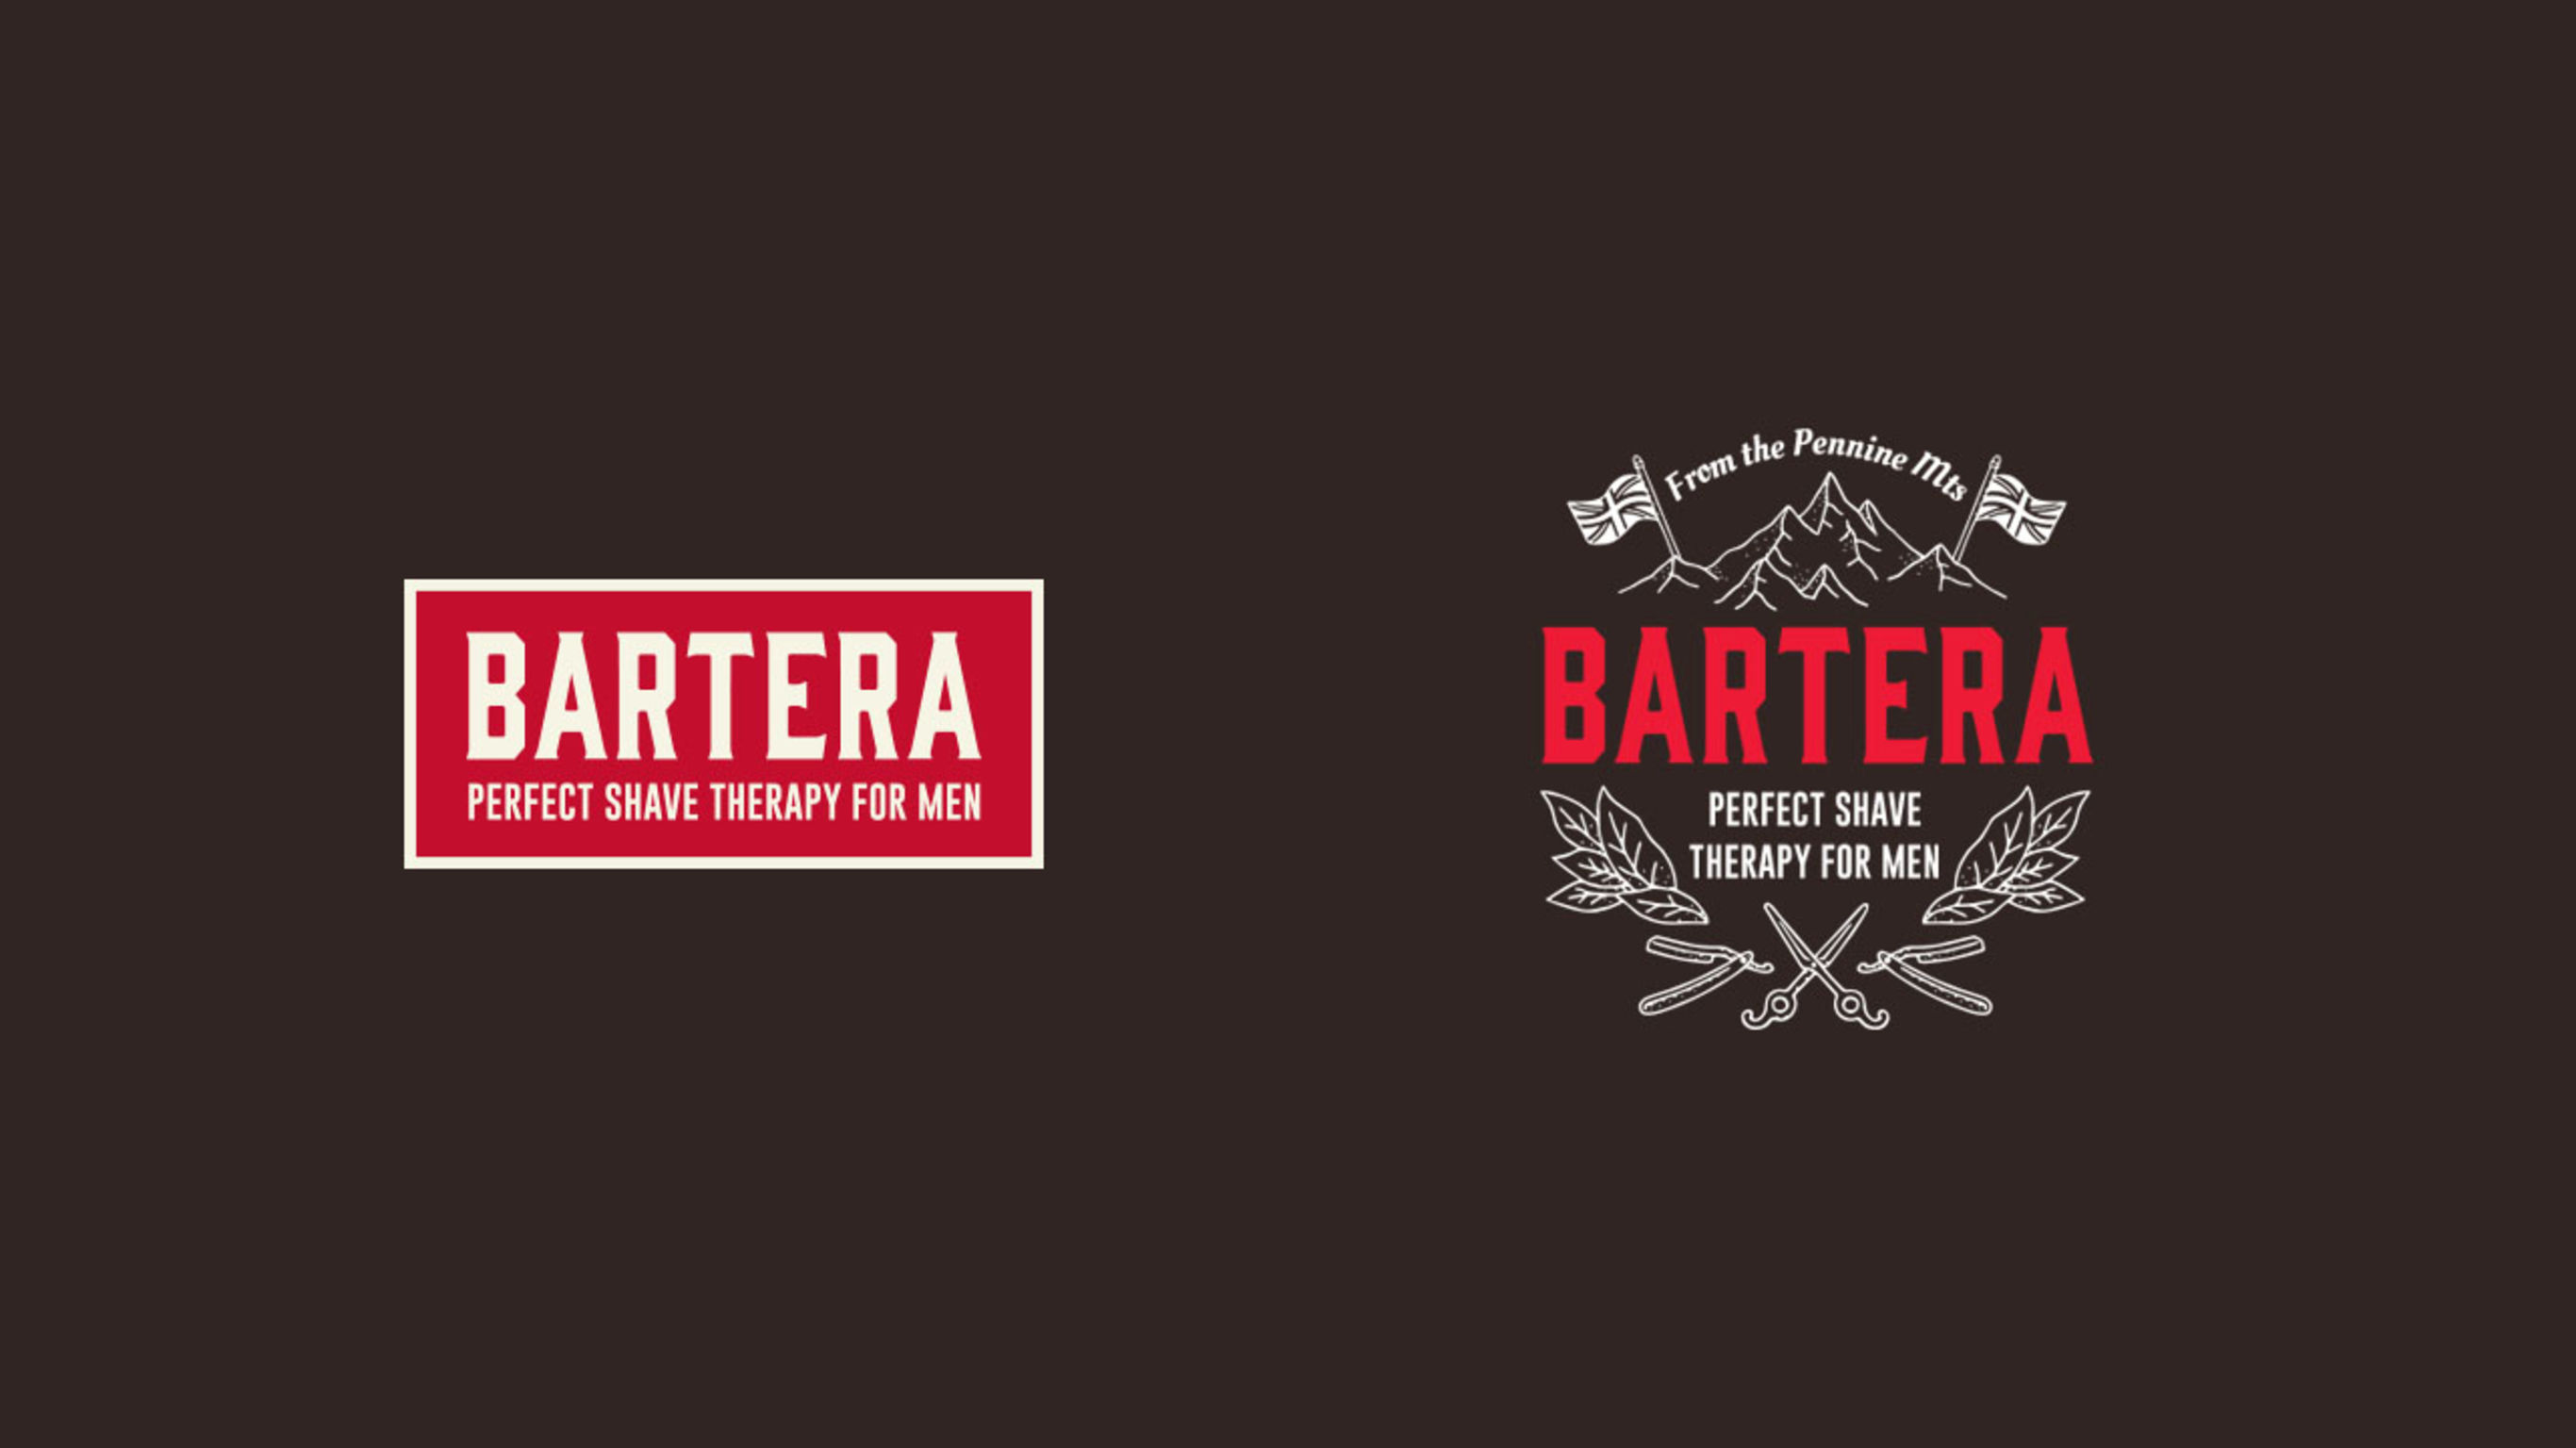 BARTERA Perfect shave therapy for man